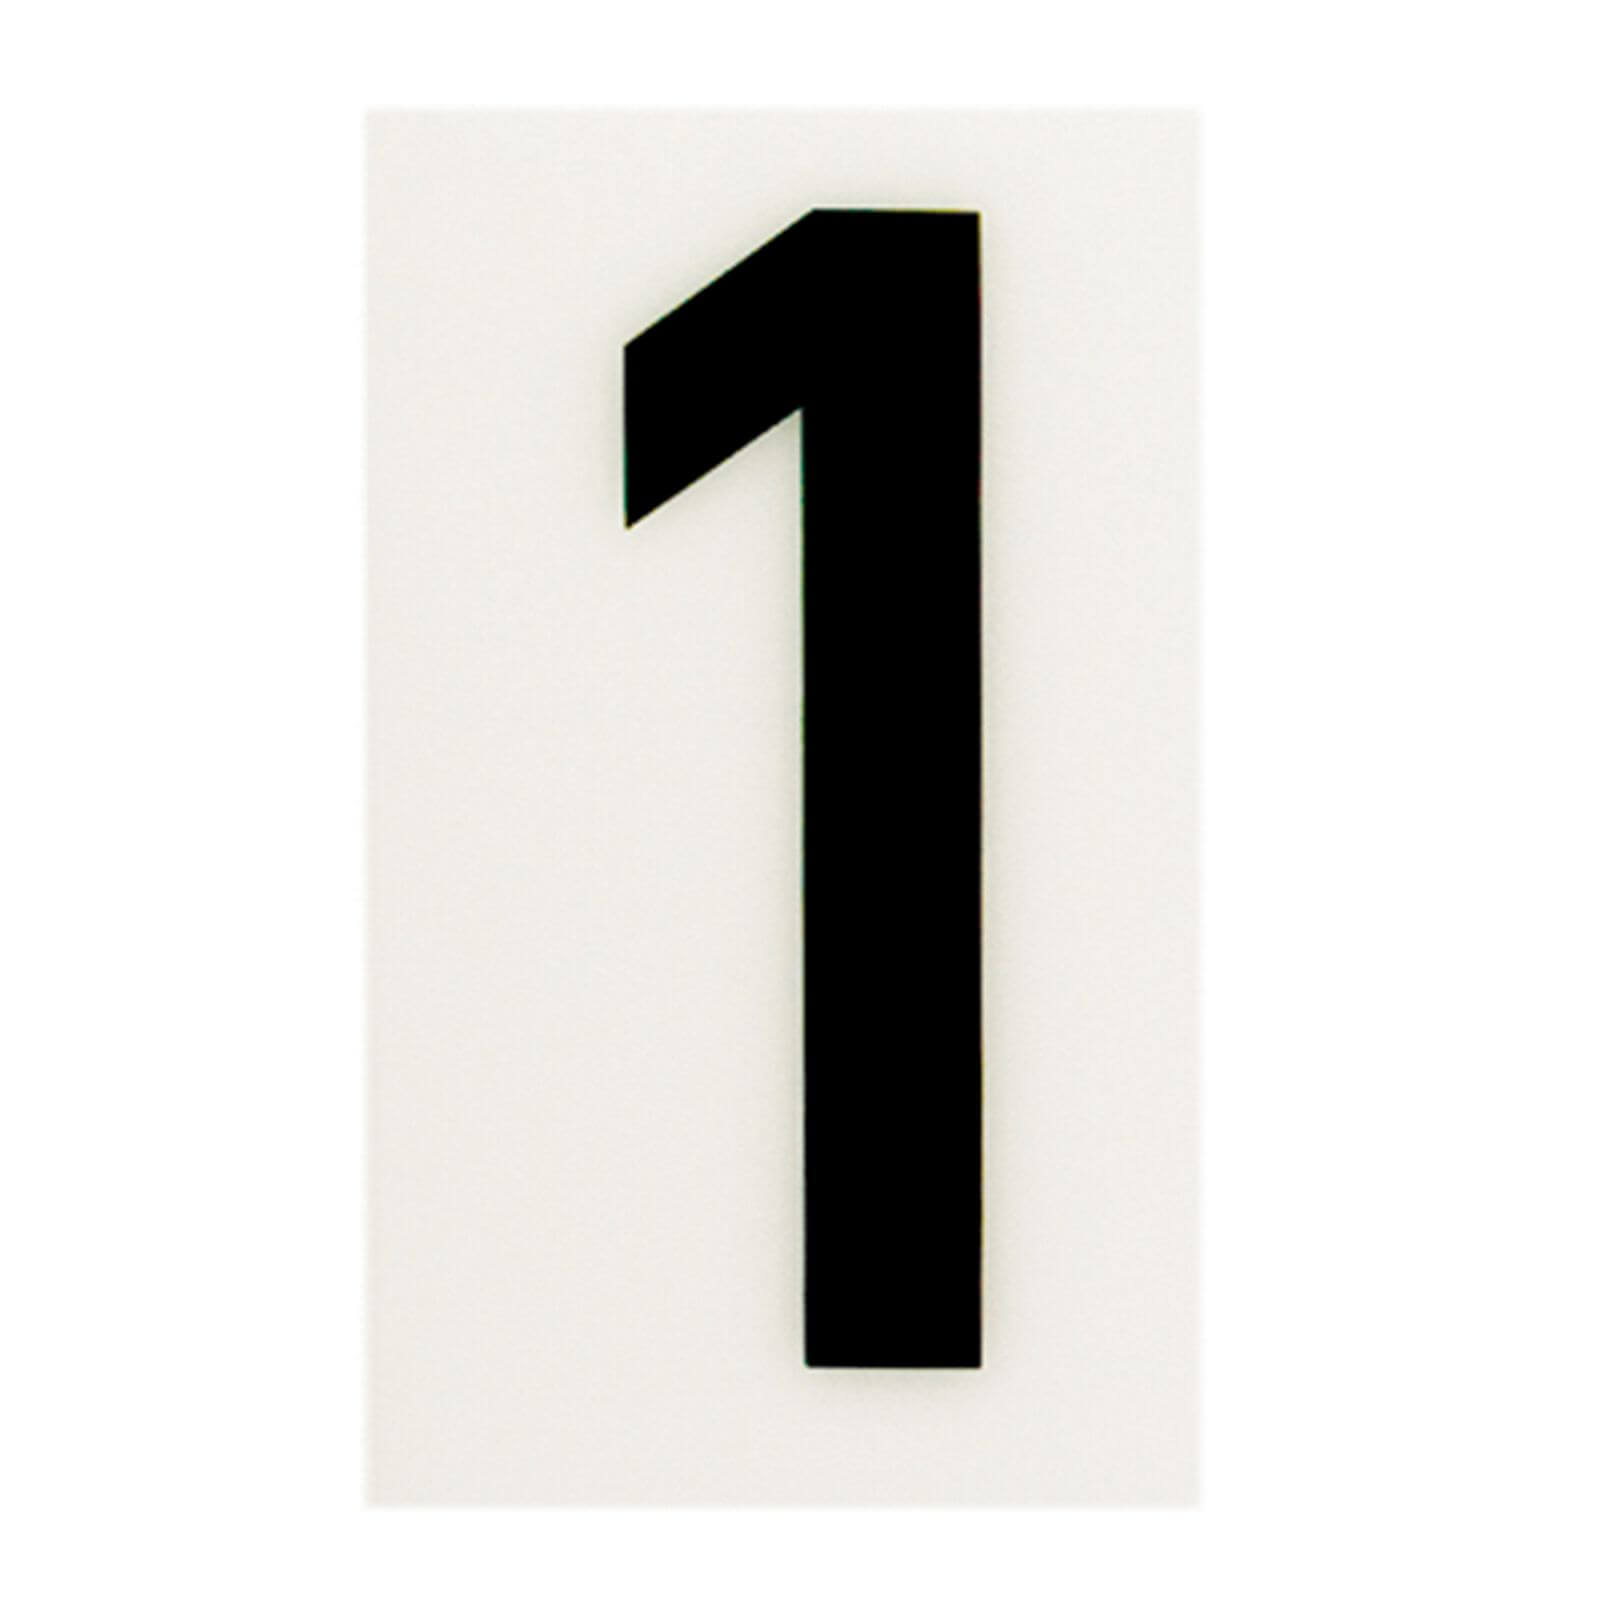 Breeze White Self Adhesive House Number - 60mm - 1